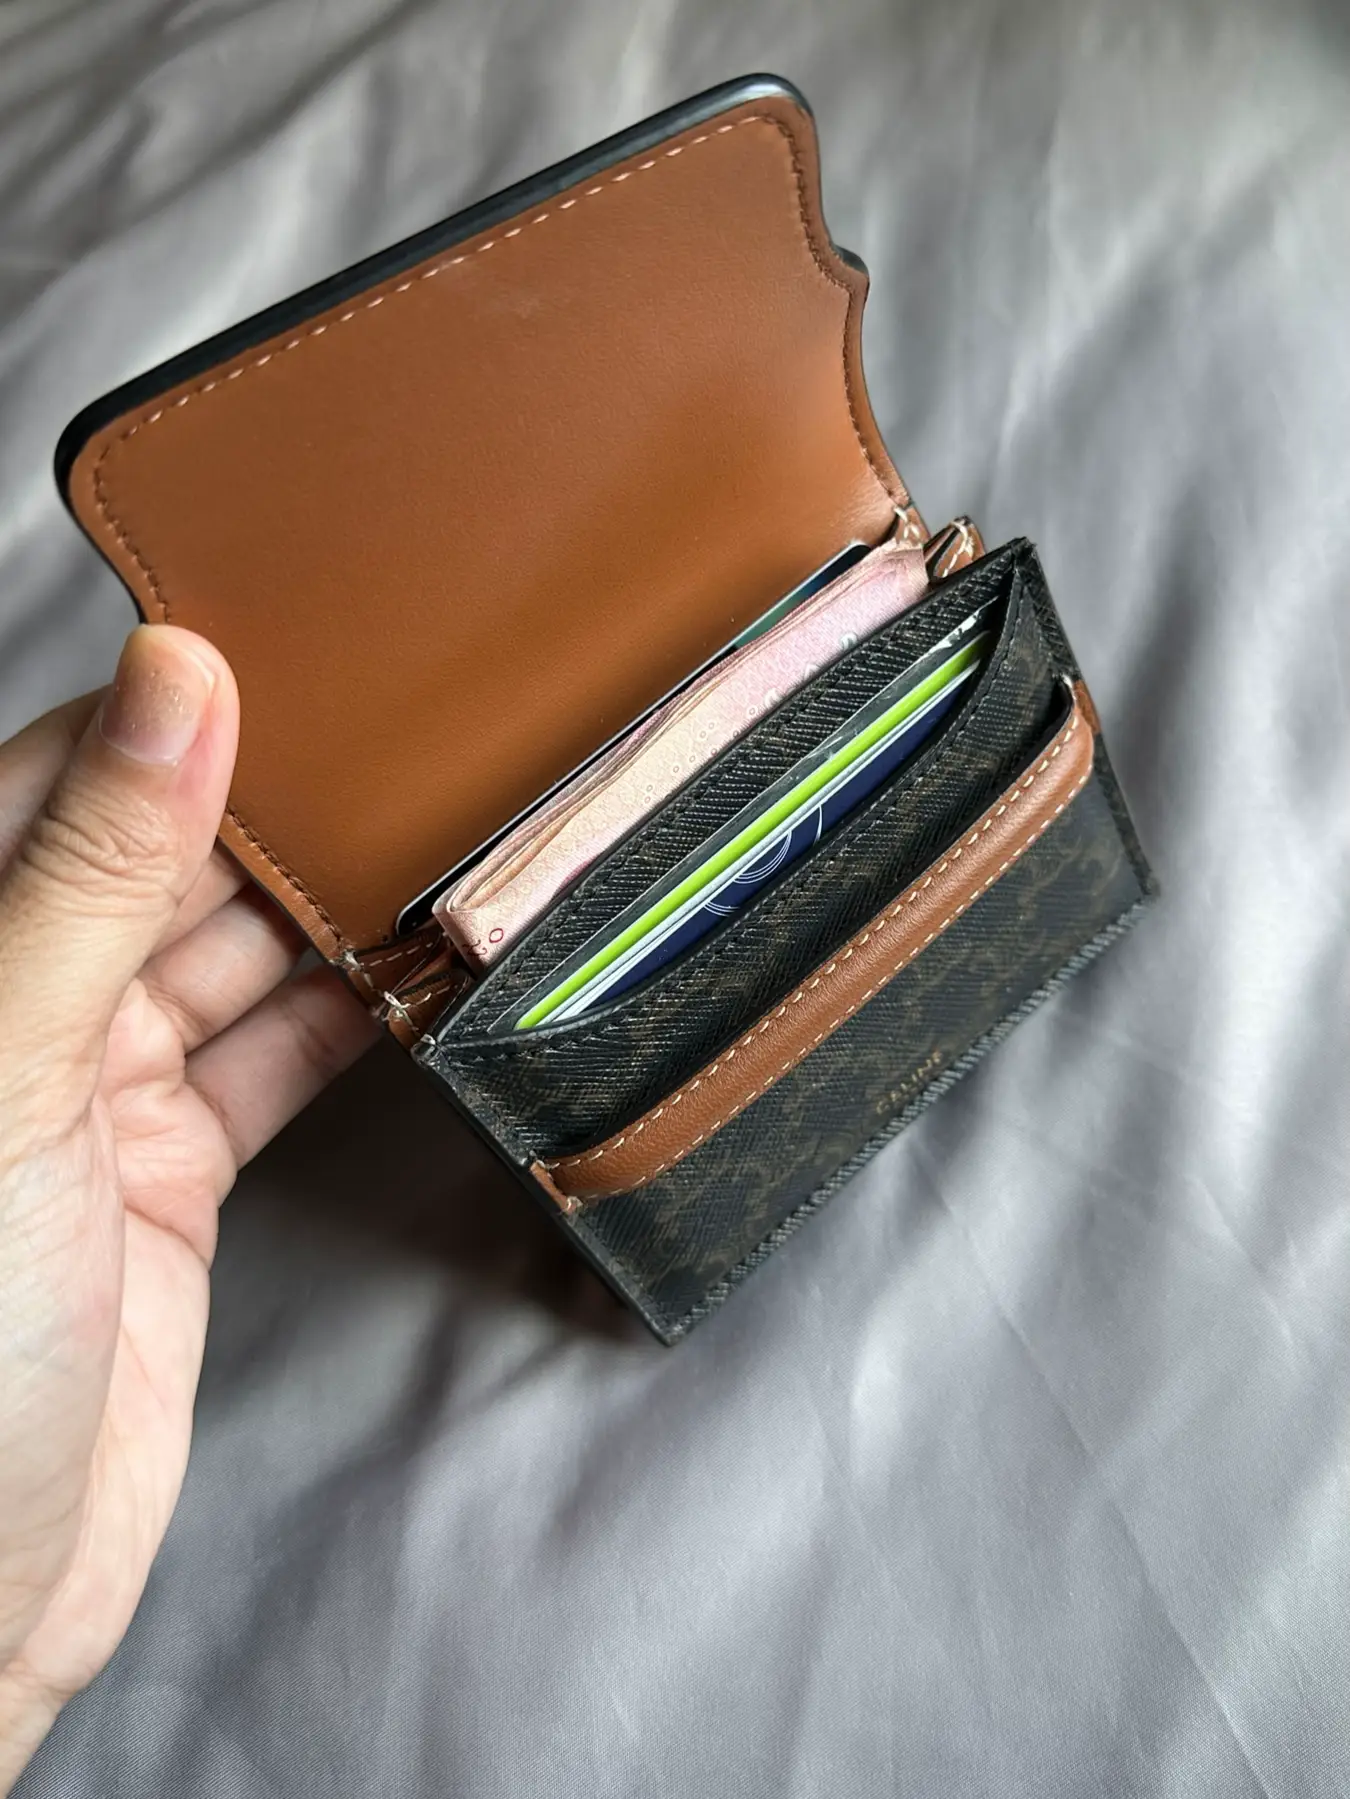 CARD HOLDER REVIEW OF CELINE, Gallery posted by ppawida.